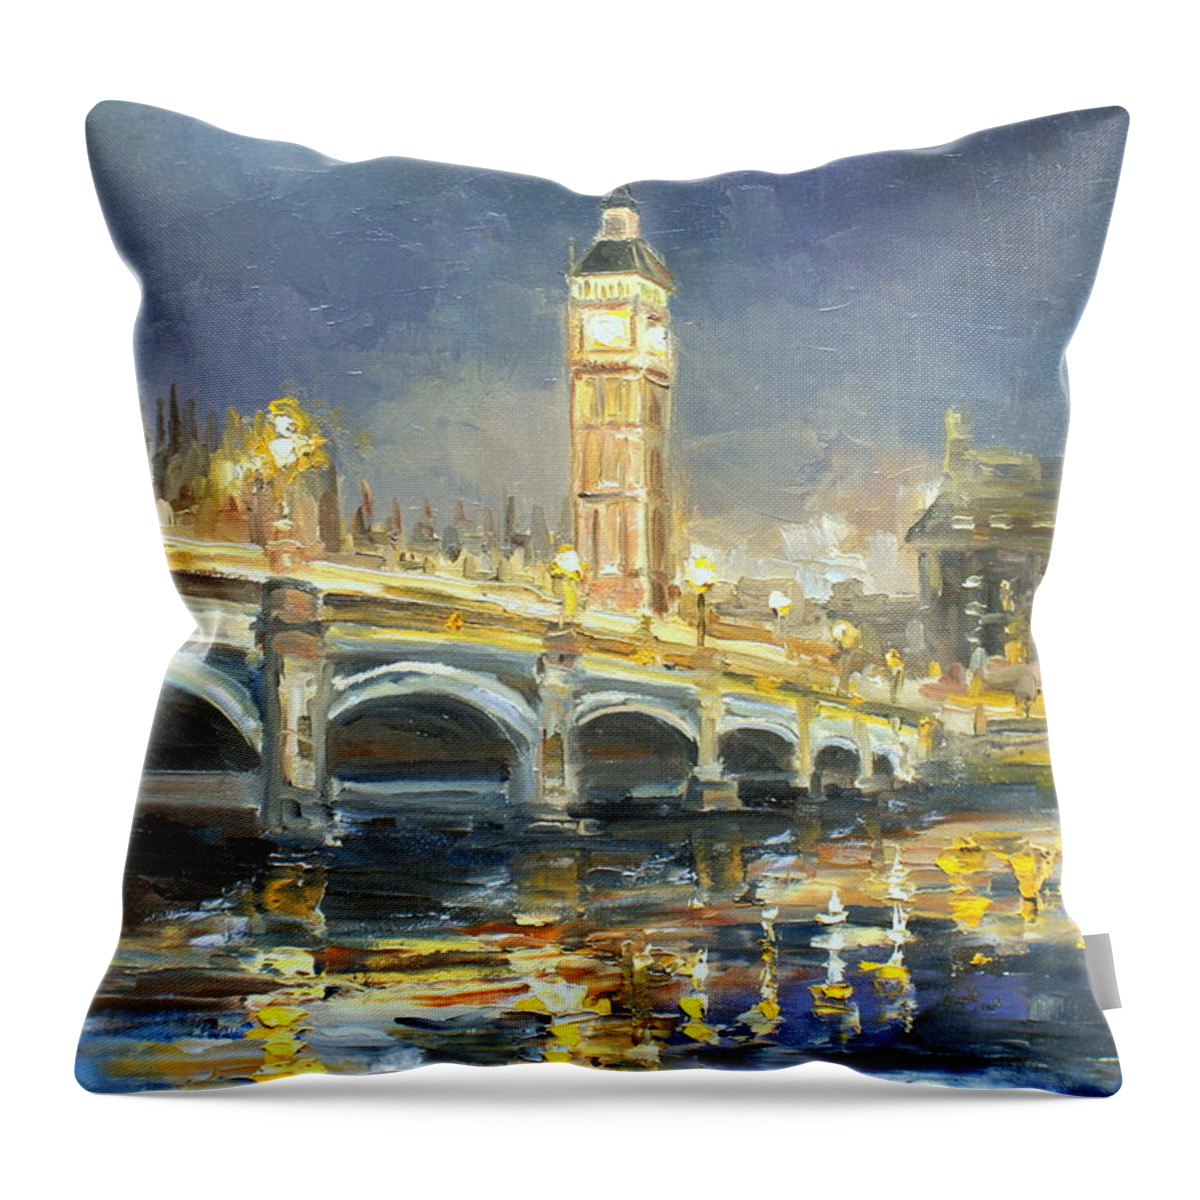 Westminster Throw Pillow featuring the painting Westminster Bridge by Luke Karcz